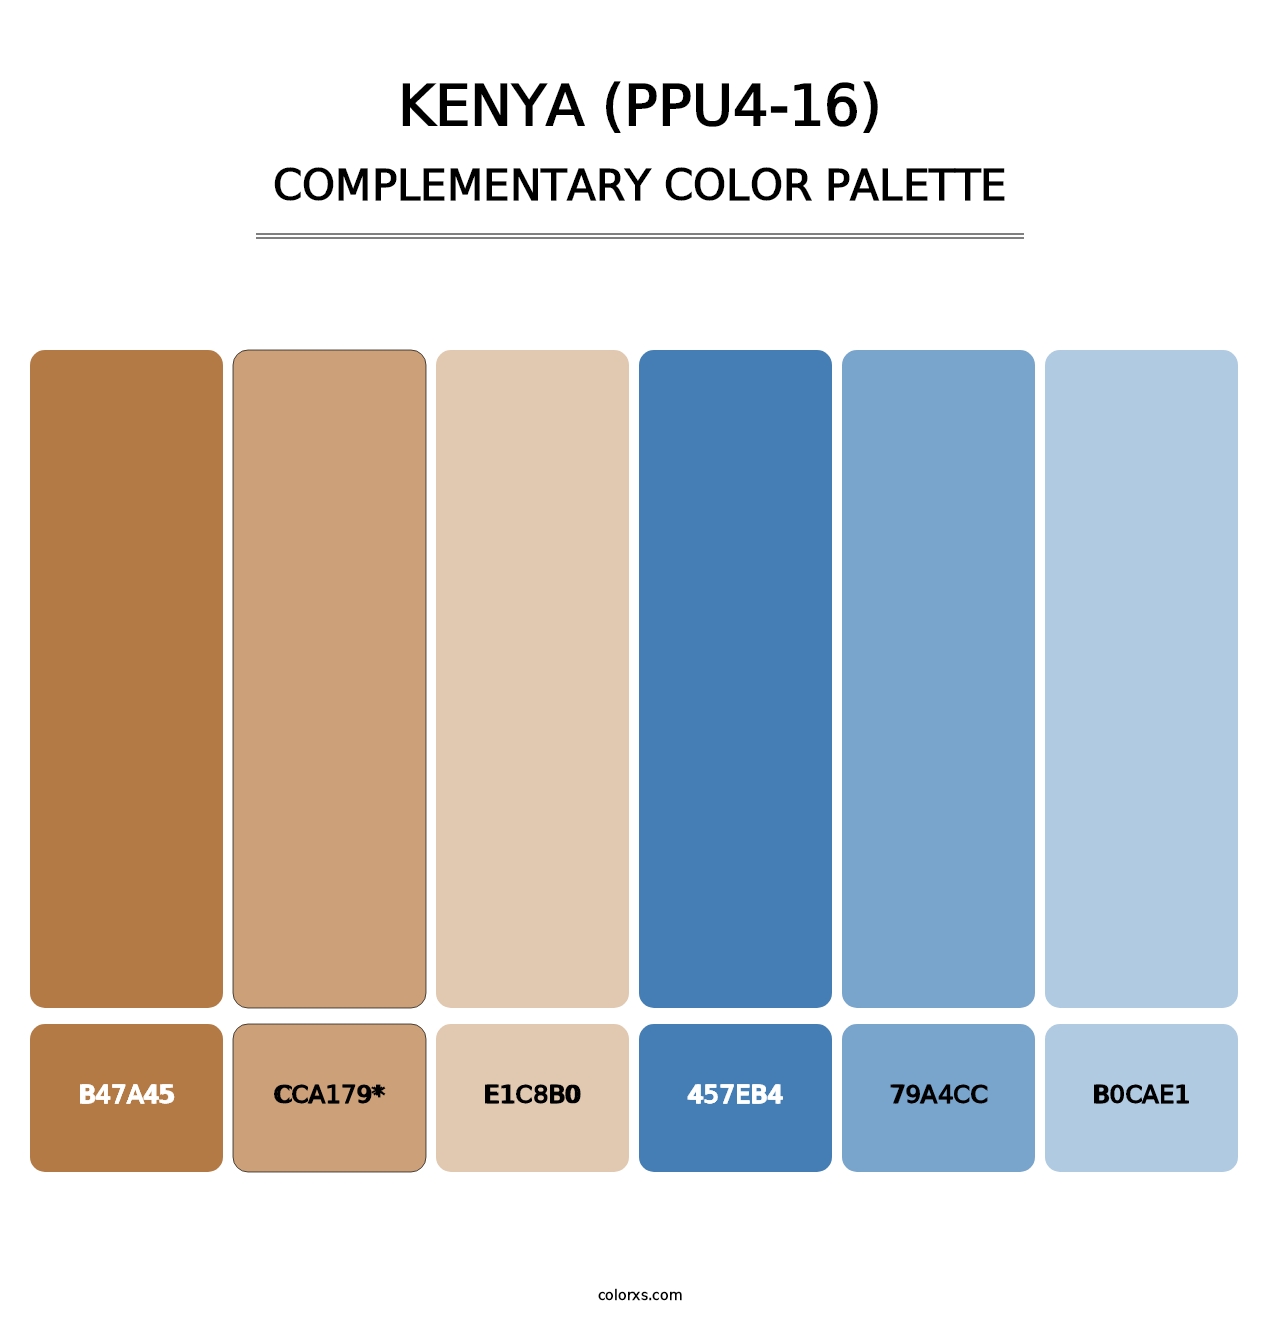 Kenya (PPU4-16) - Complementary Color Palette